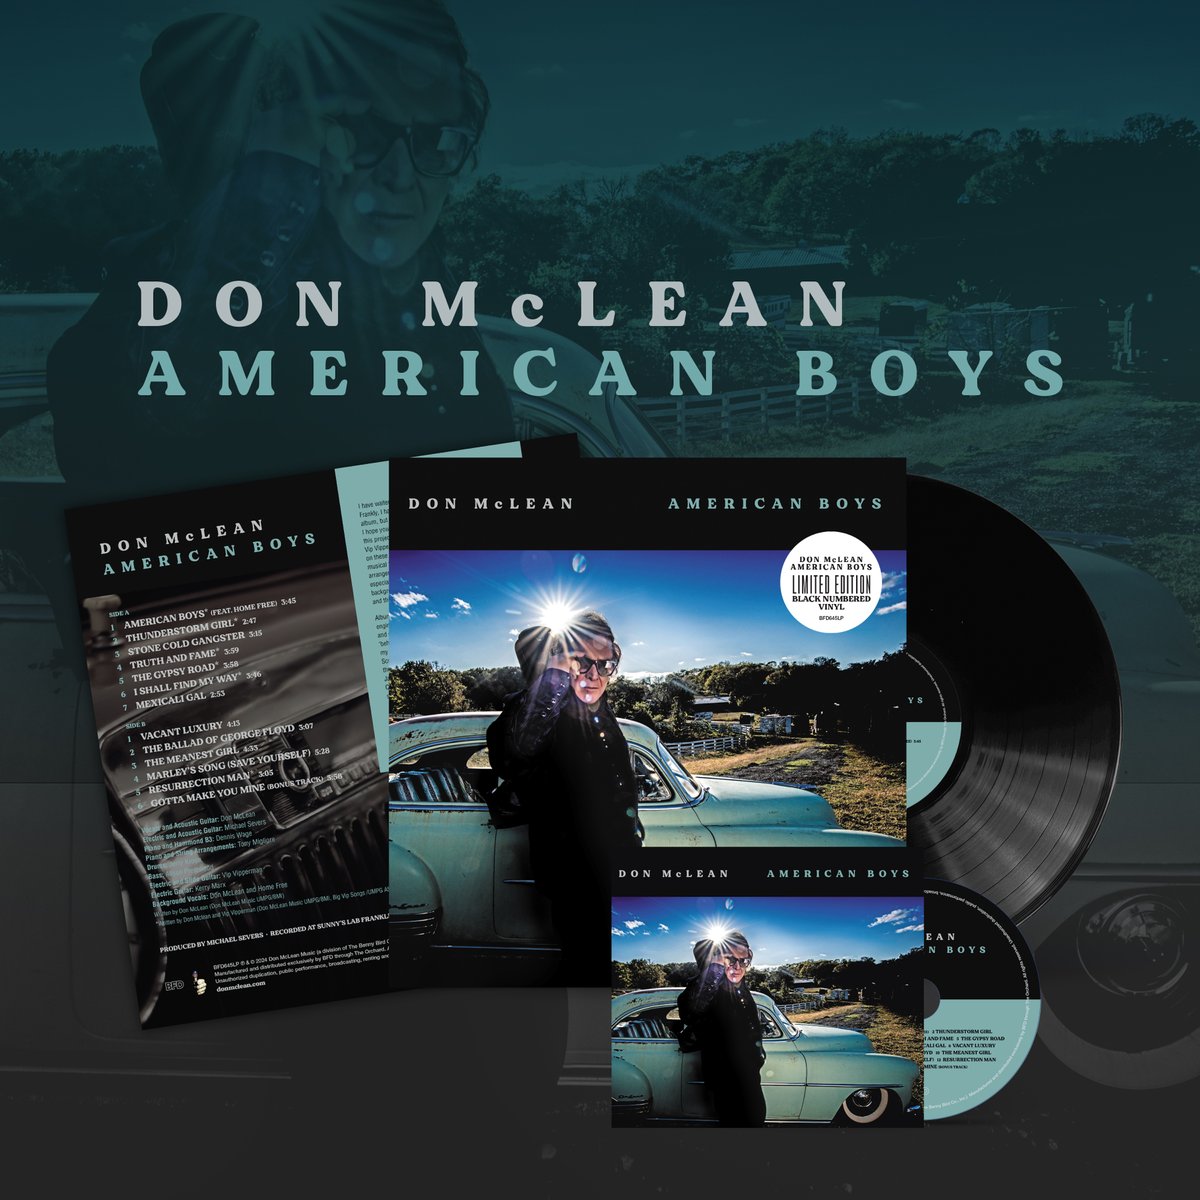 'American Troubadour - Don McLean ' by Set Lusting Bruce: The Bruce Springsteen Fan Podcast megaphone.link/PAN4072534688 @SetLustingBruce #donmclean #americanboys